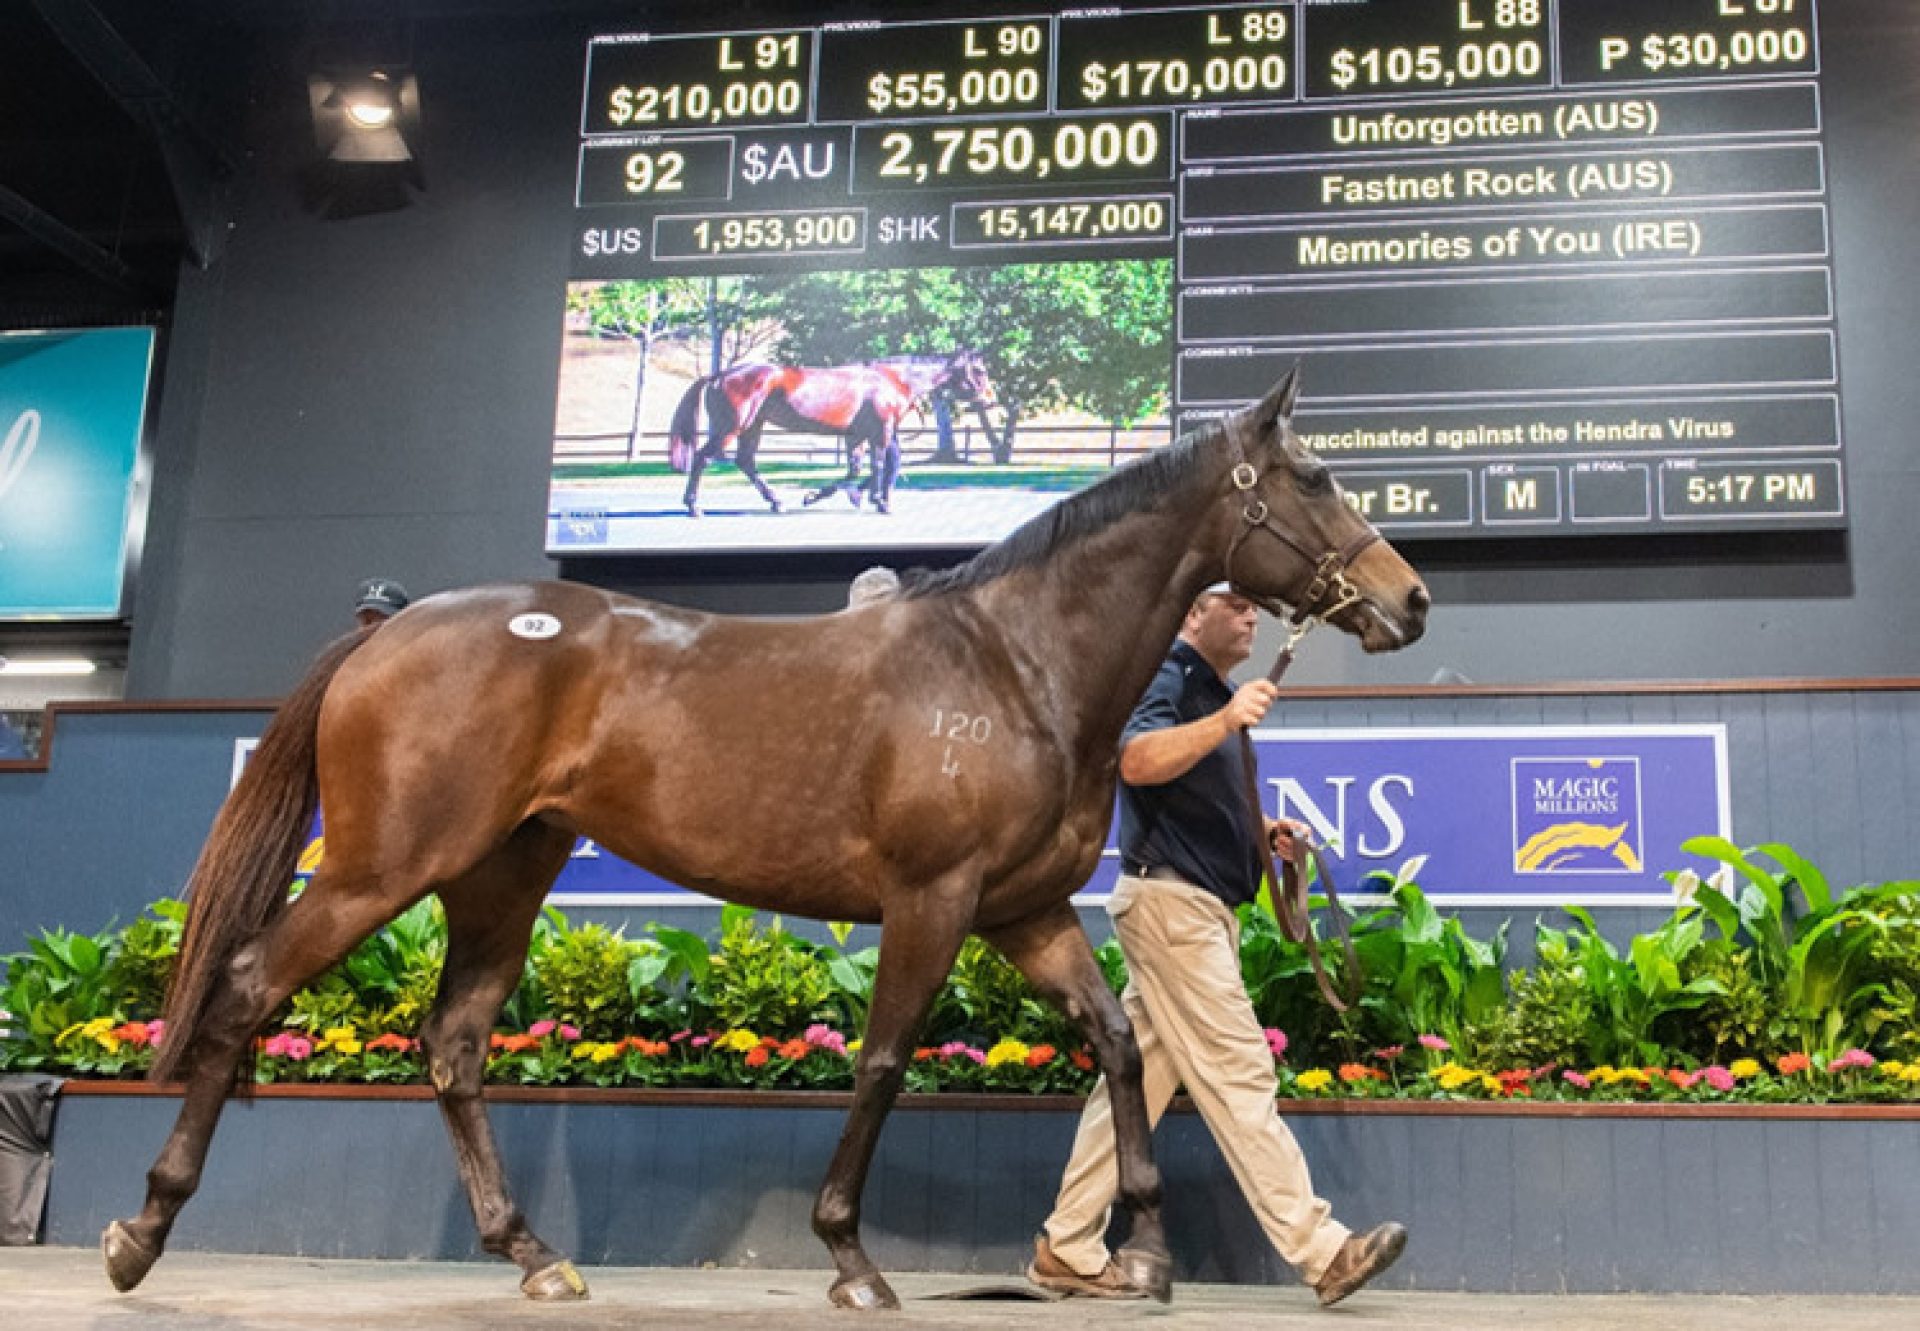 Unforgotten (Fastnet Rock) selling for $2.75 million at the Magic Millions National Sale